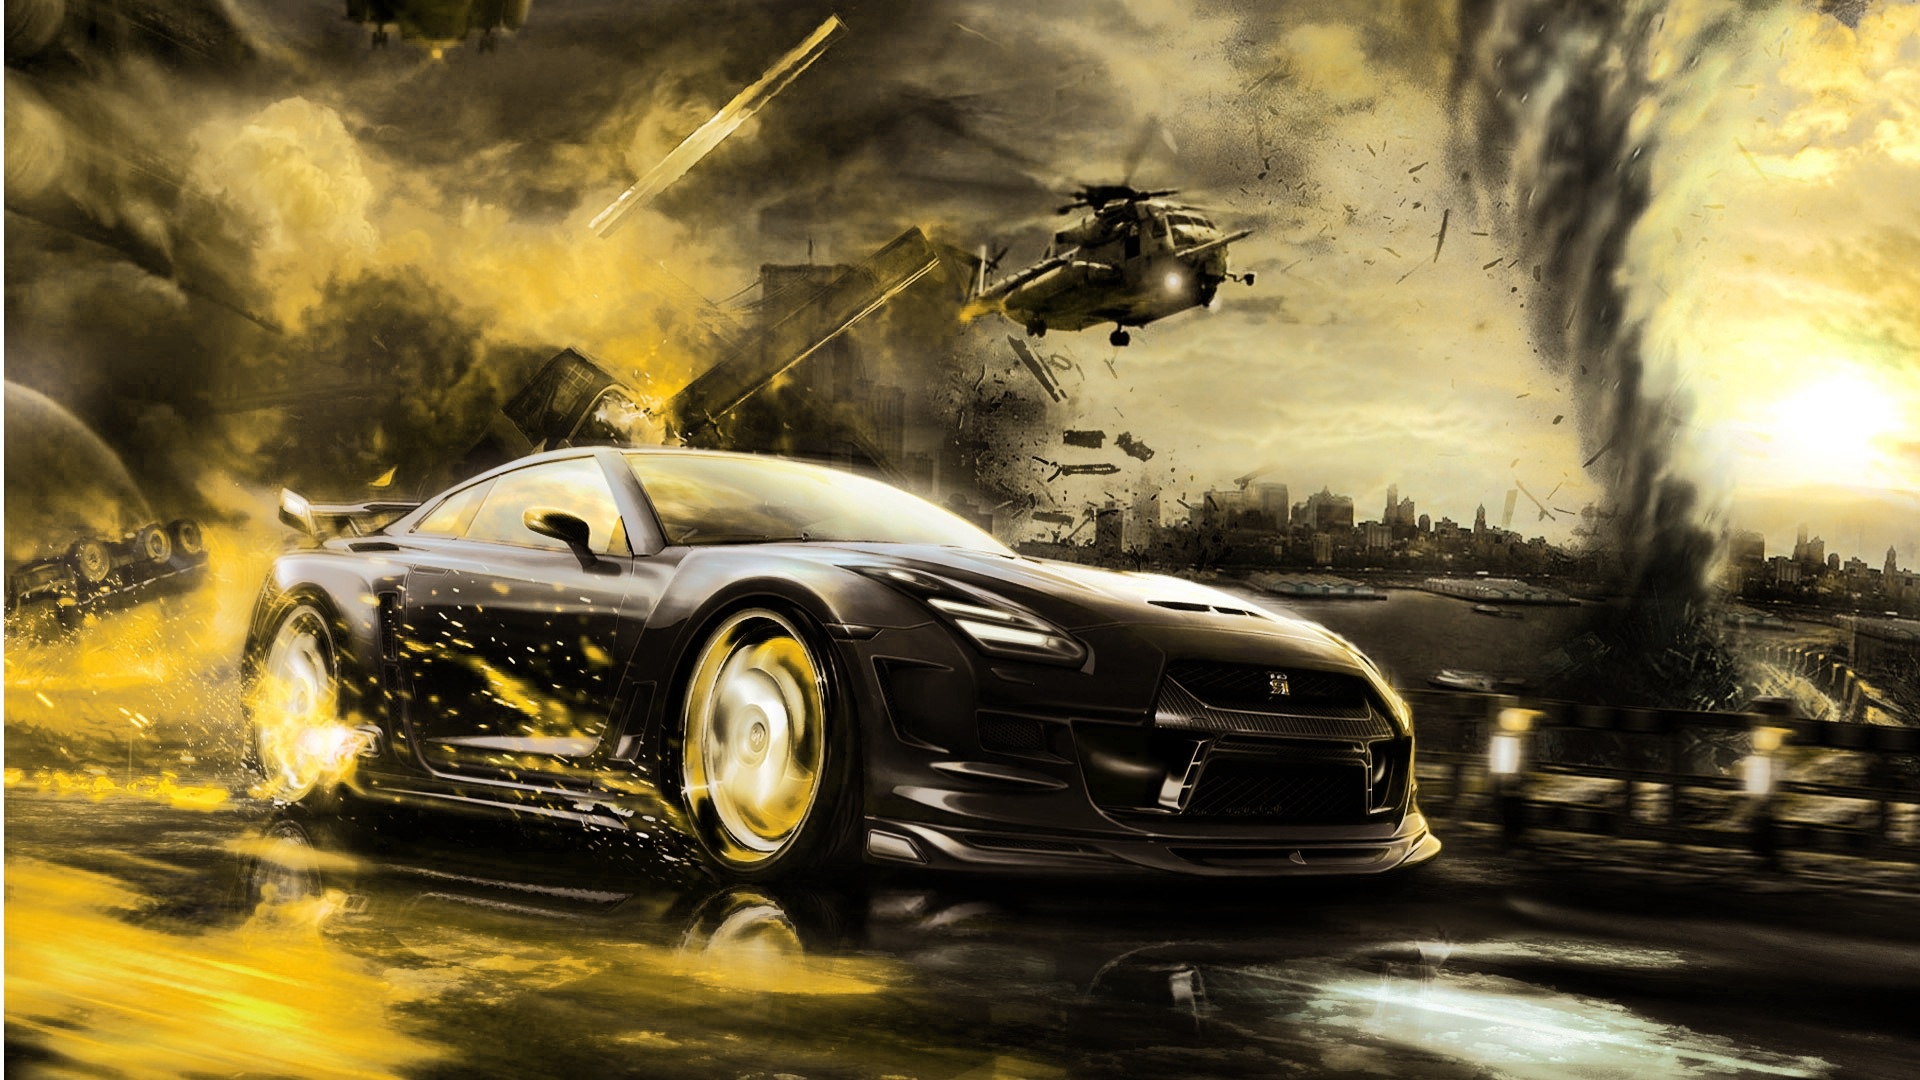 Image HD Wallpaper 1080p Cars Pc Android iPhone